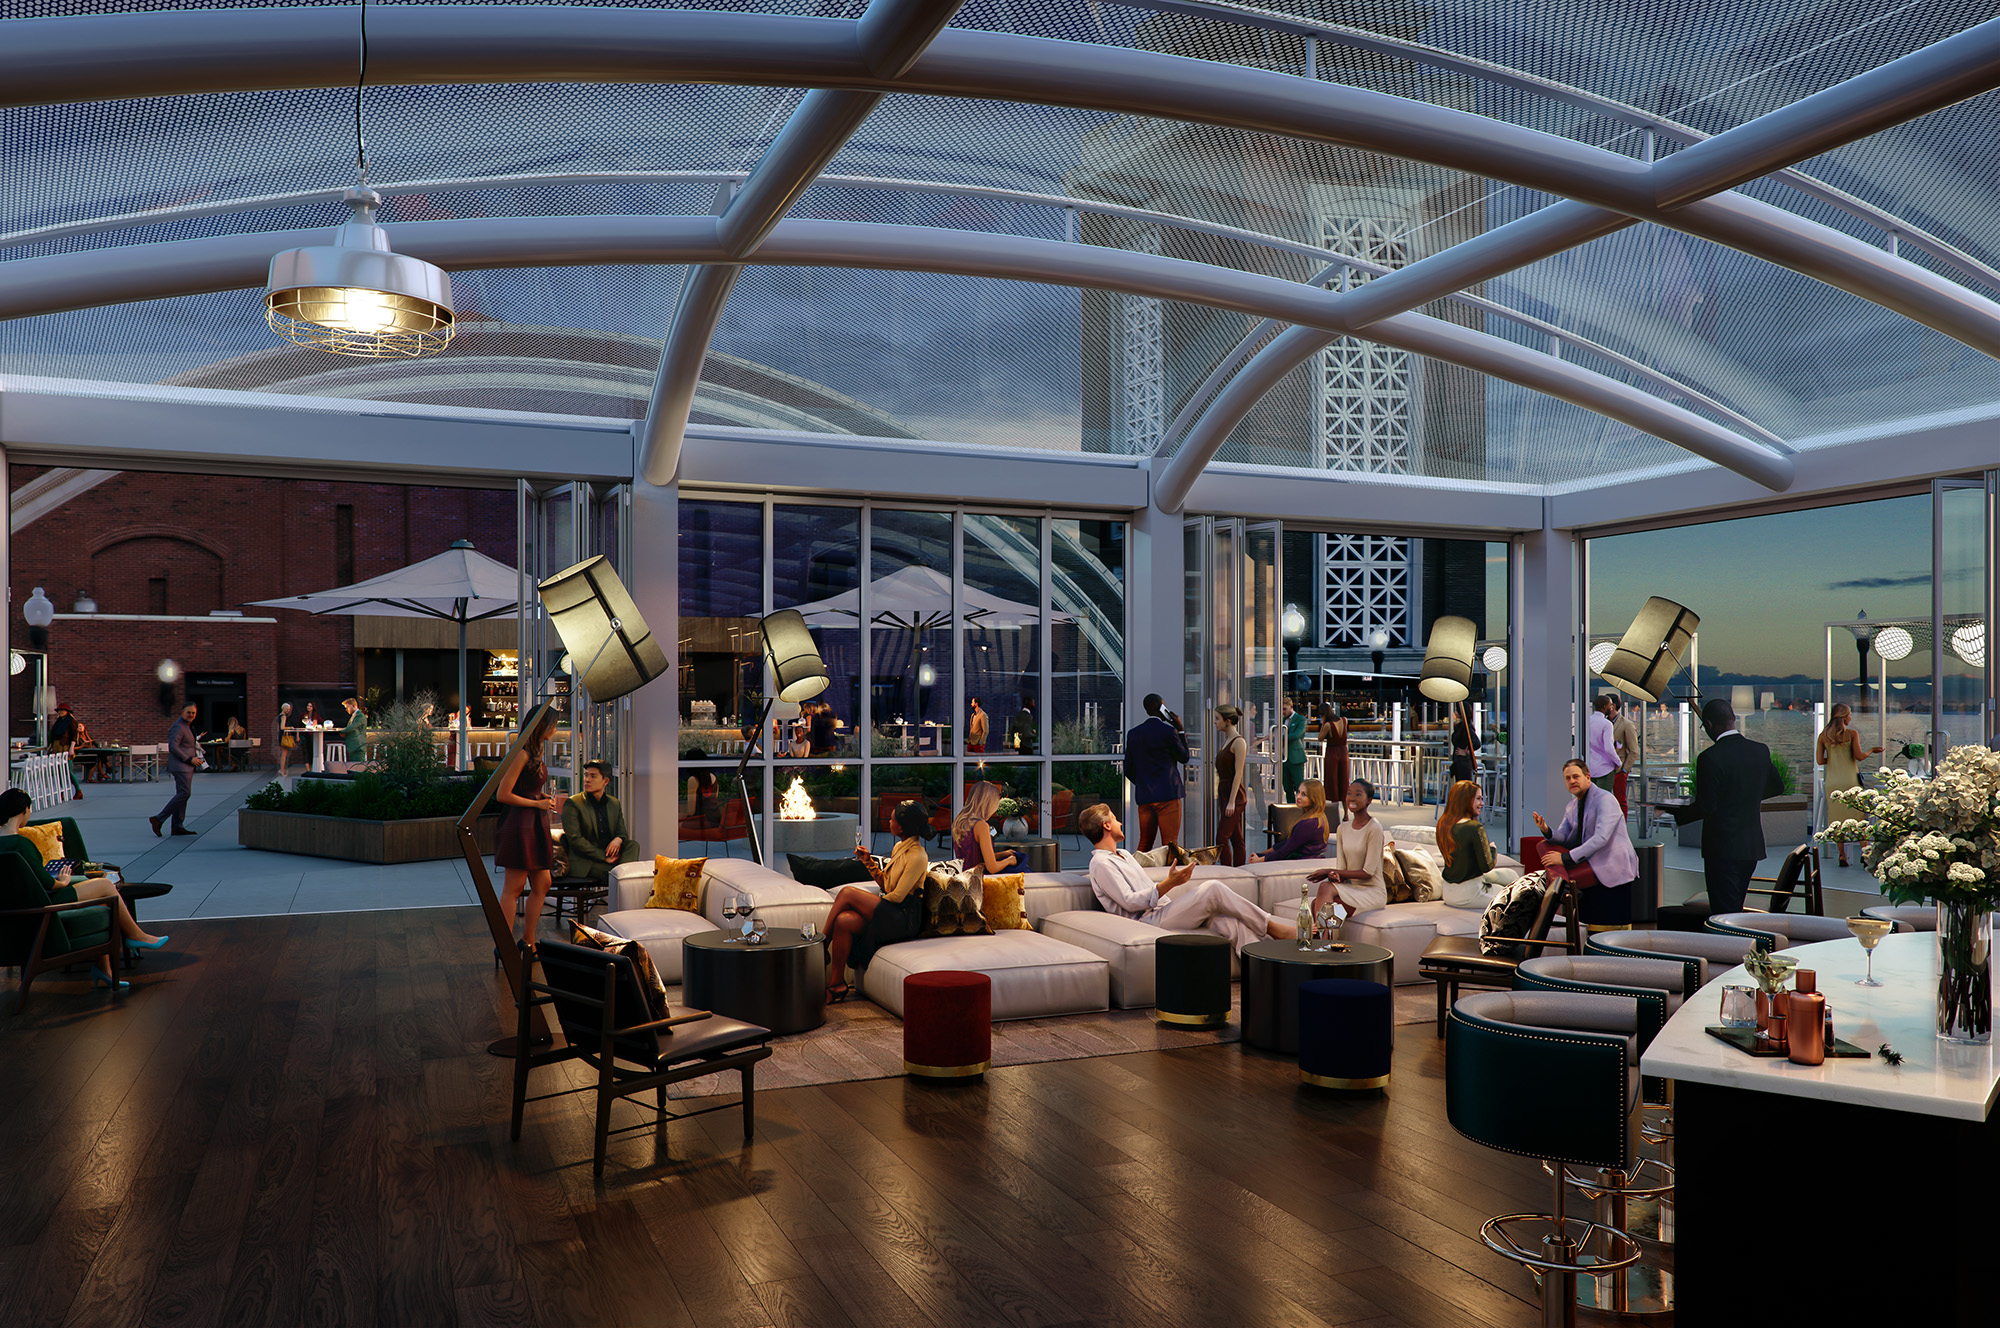 Offshore Rooftop Opening Atop Navy Pier This Month | Chicago Food Magazine